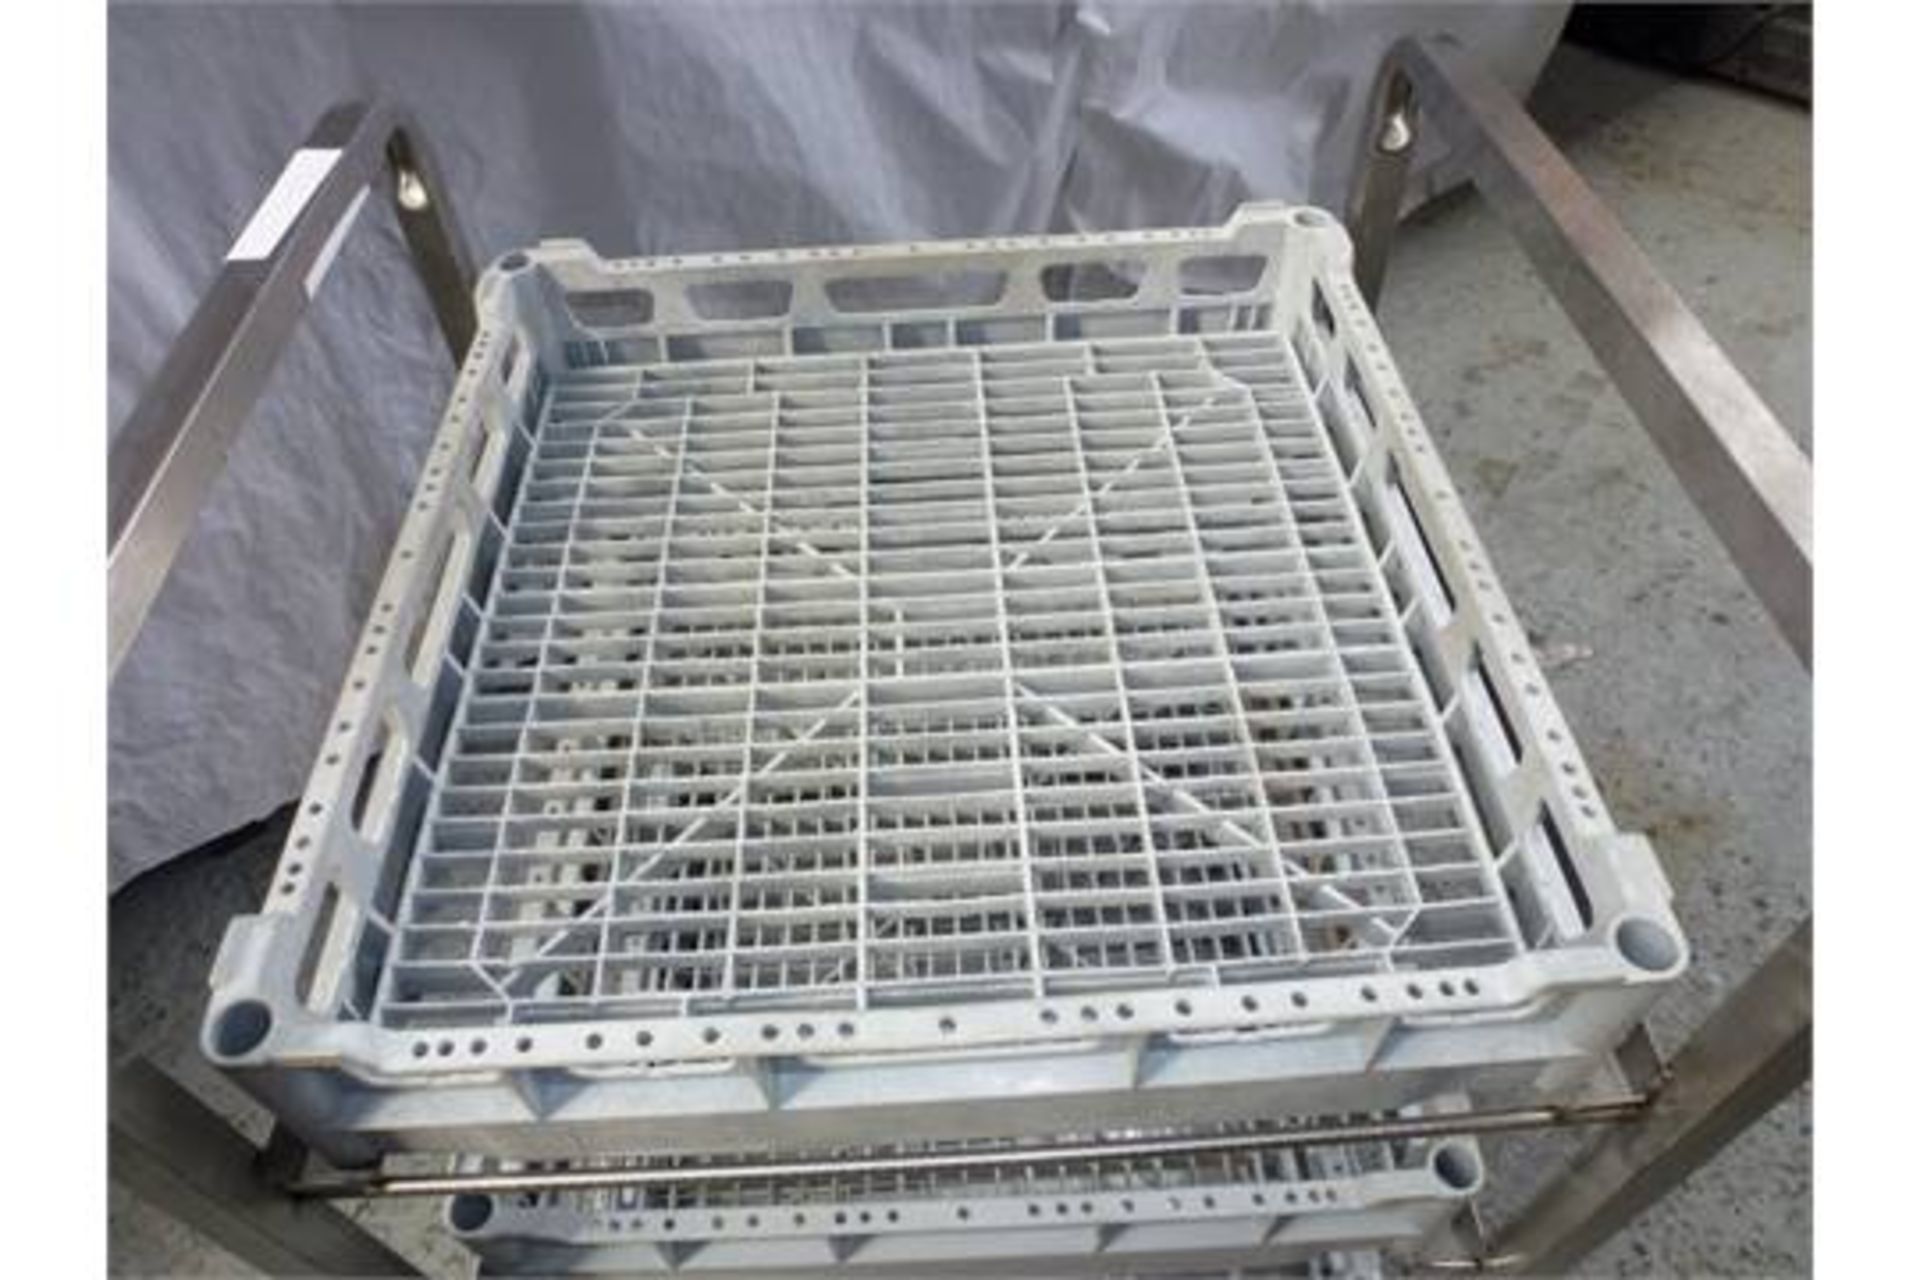 1 x Stainless Steel Pint Glass Pot Collector Trolly - 3 Tier Trolley With Removable Trays, Drip Tray - Image 2 of 6